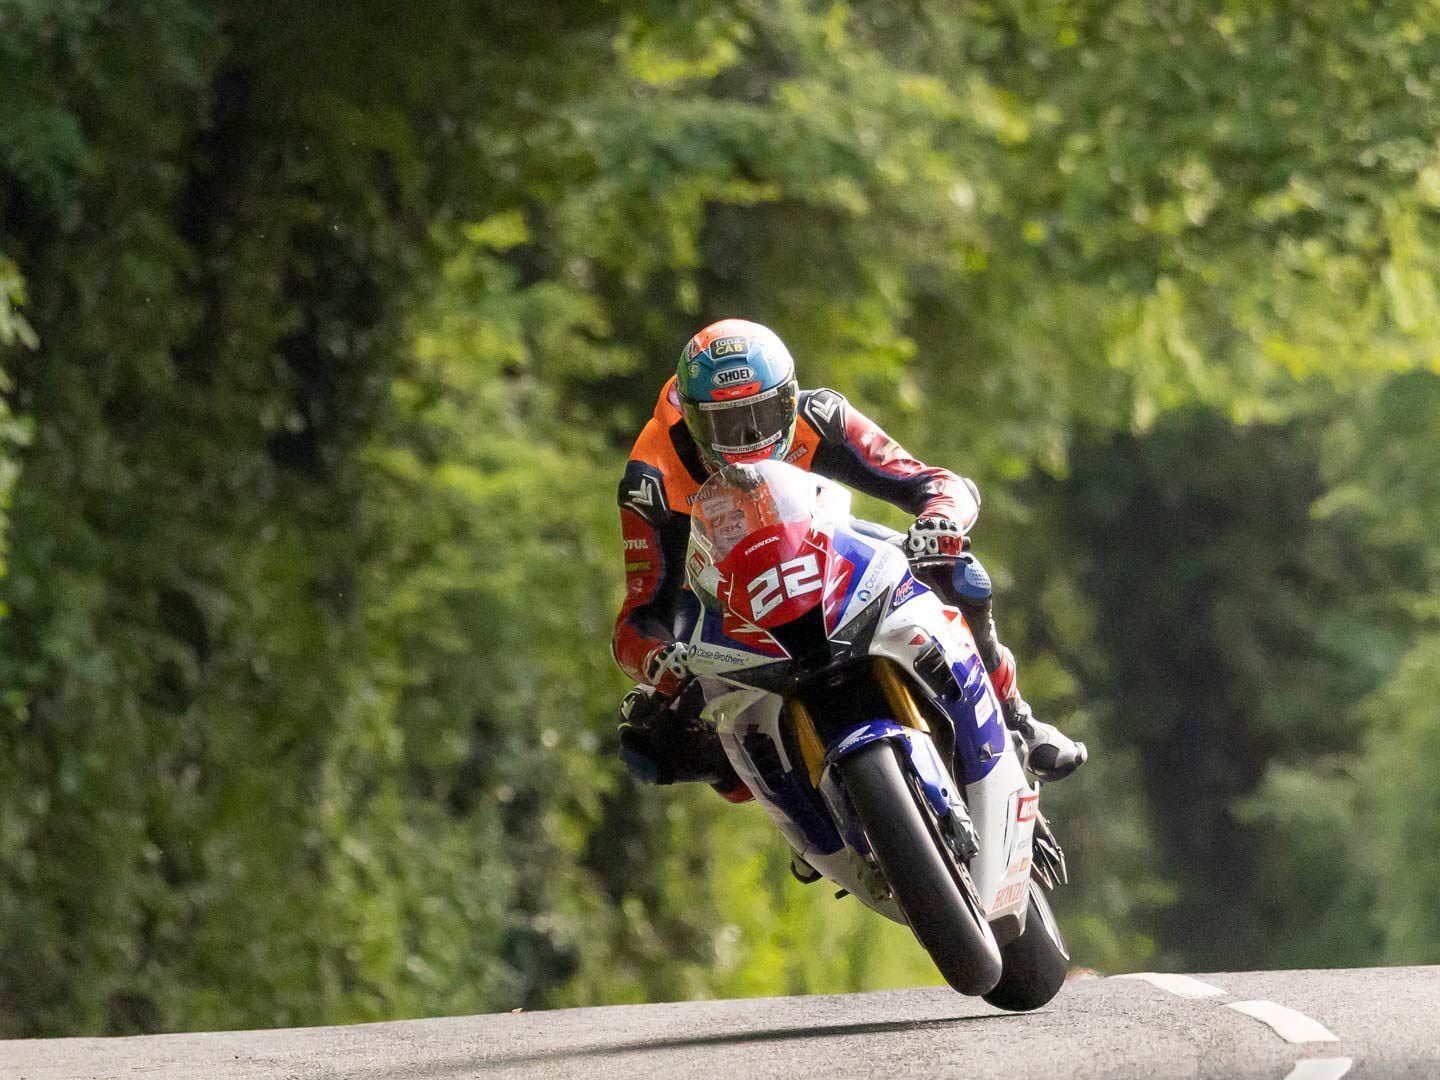 TT newcomer Glenn Irwin, on his Honda Racing Fireblade 1000 RR-R, continues to dial in every aspect of his TT riding.